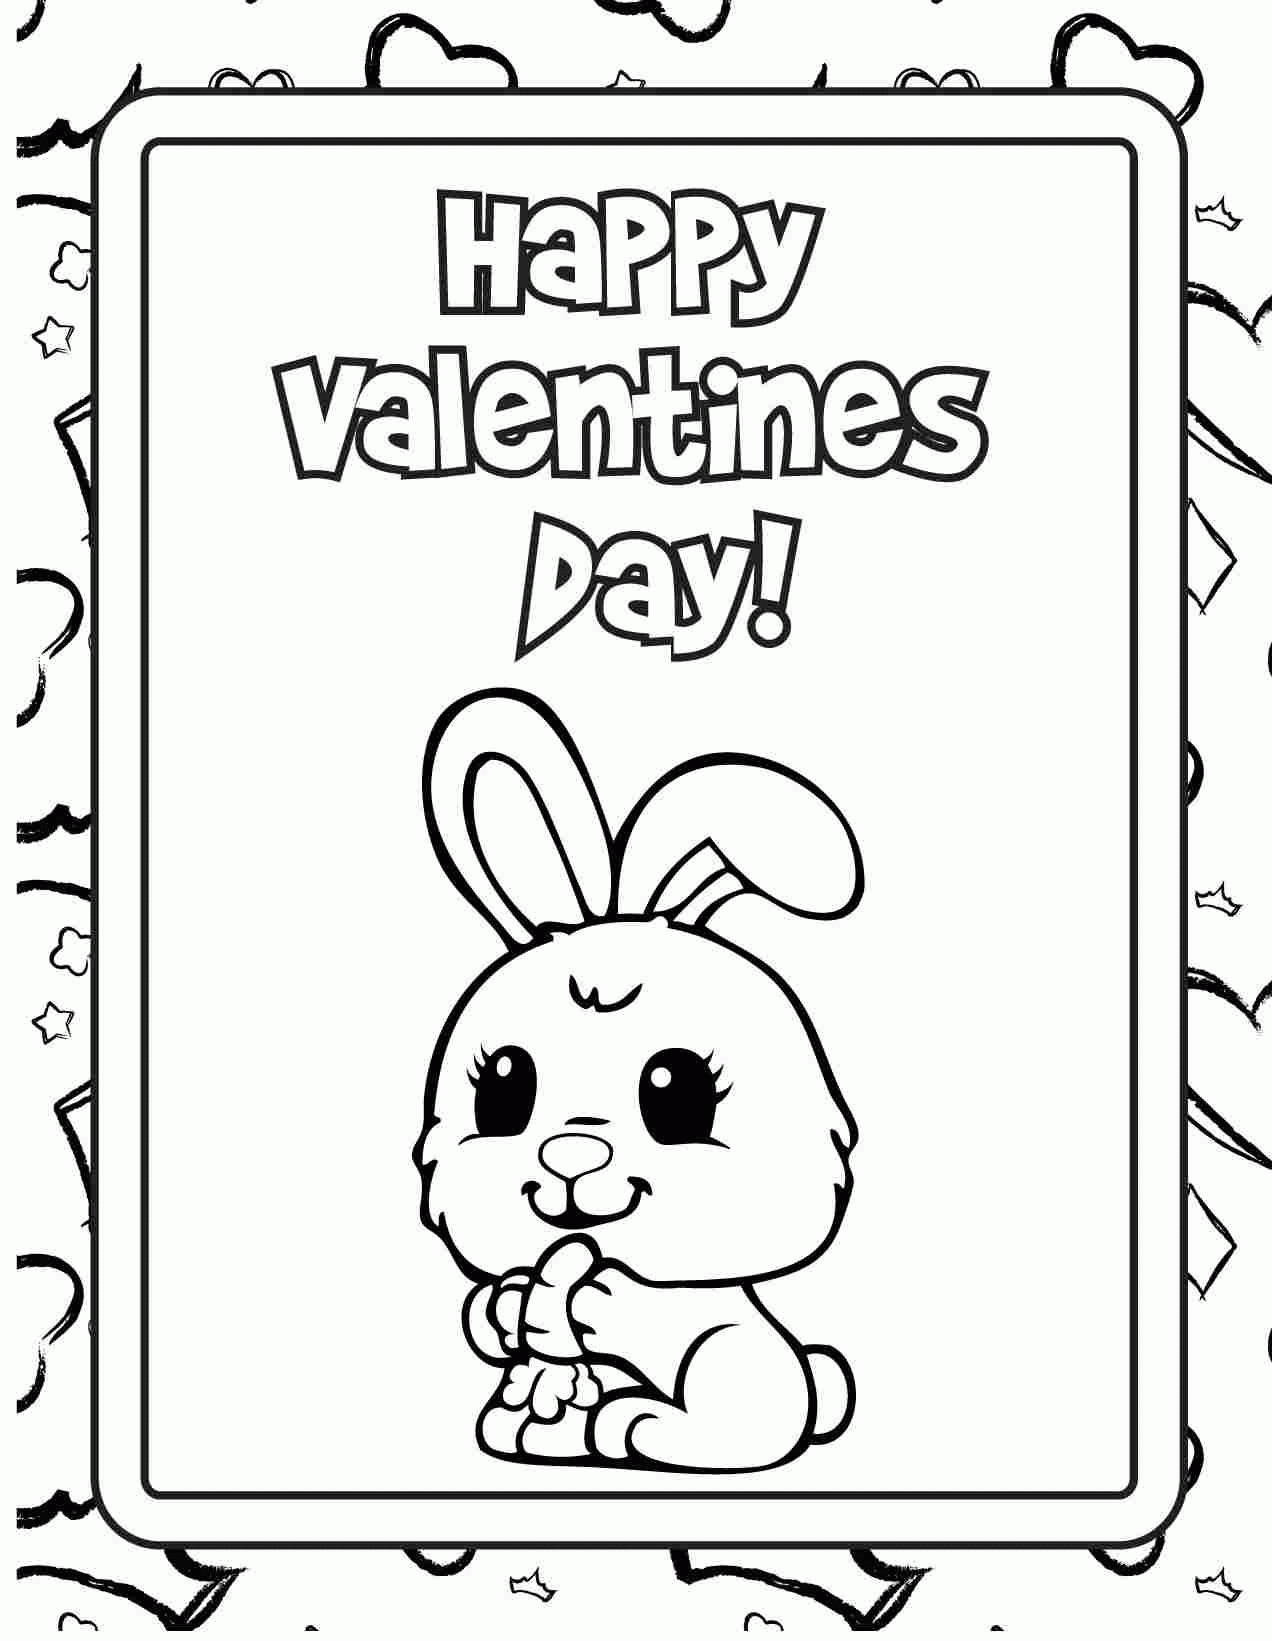 Download Coloring Pages For Valentines Cards - Coloring Home